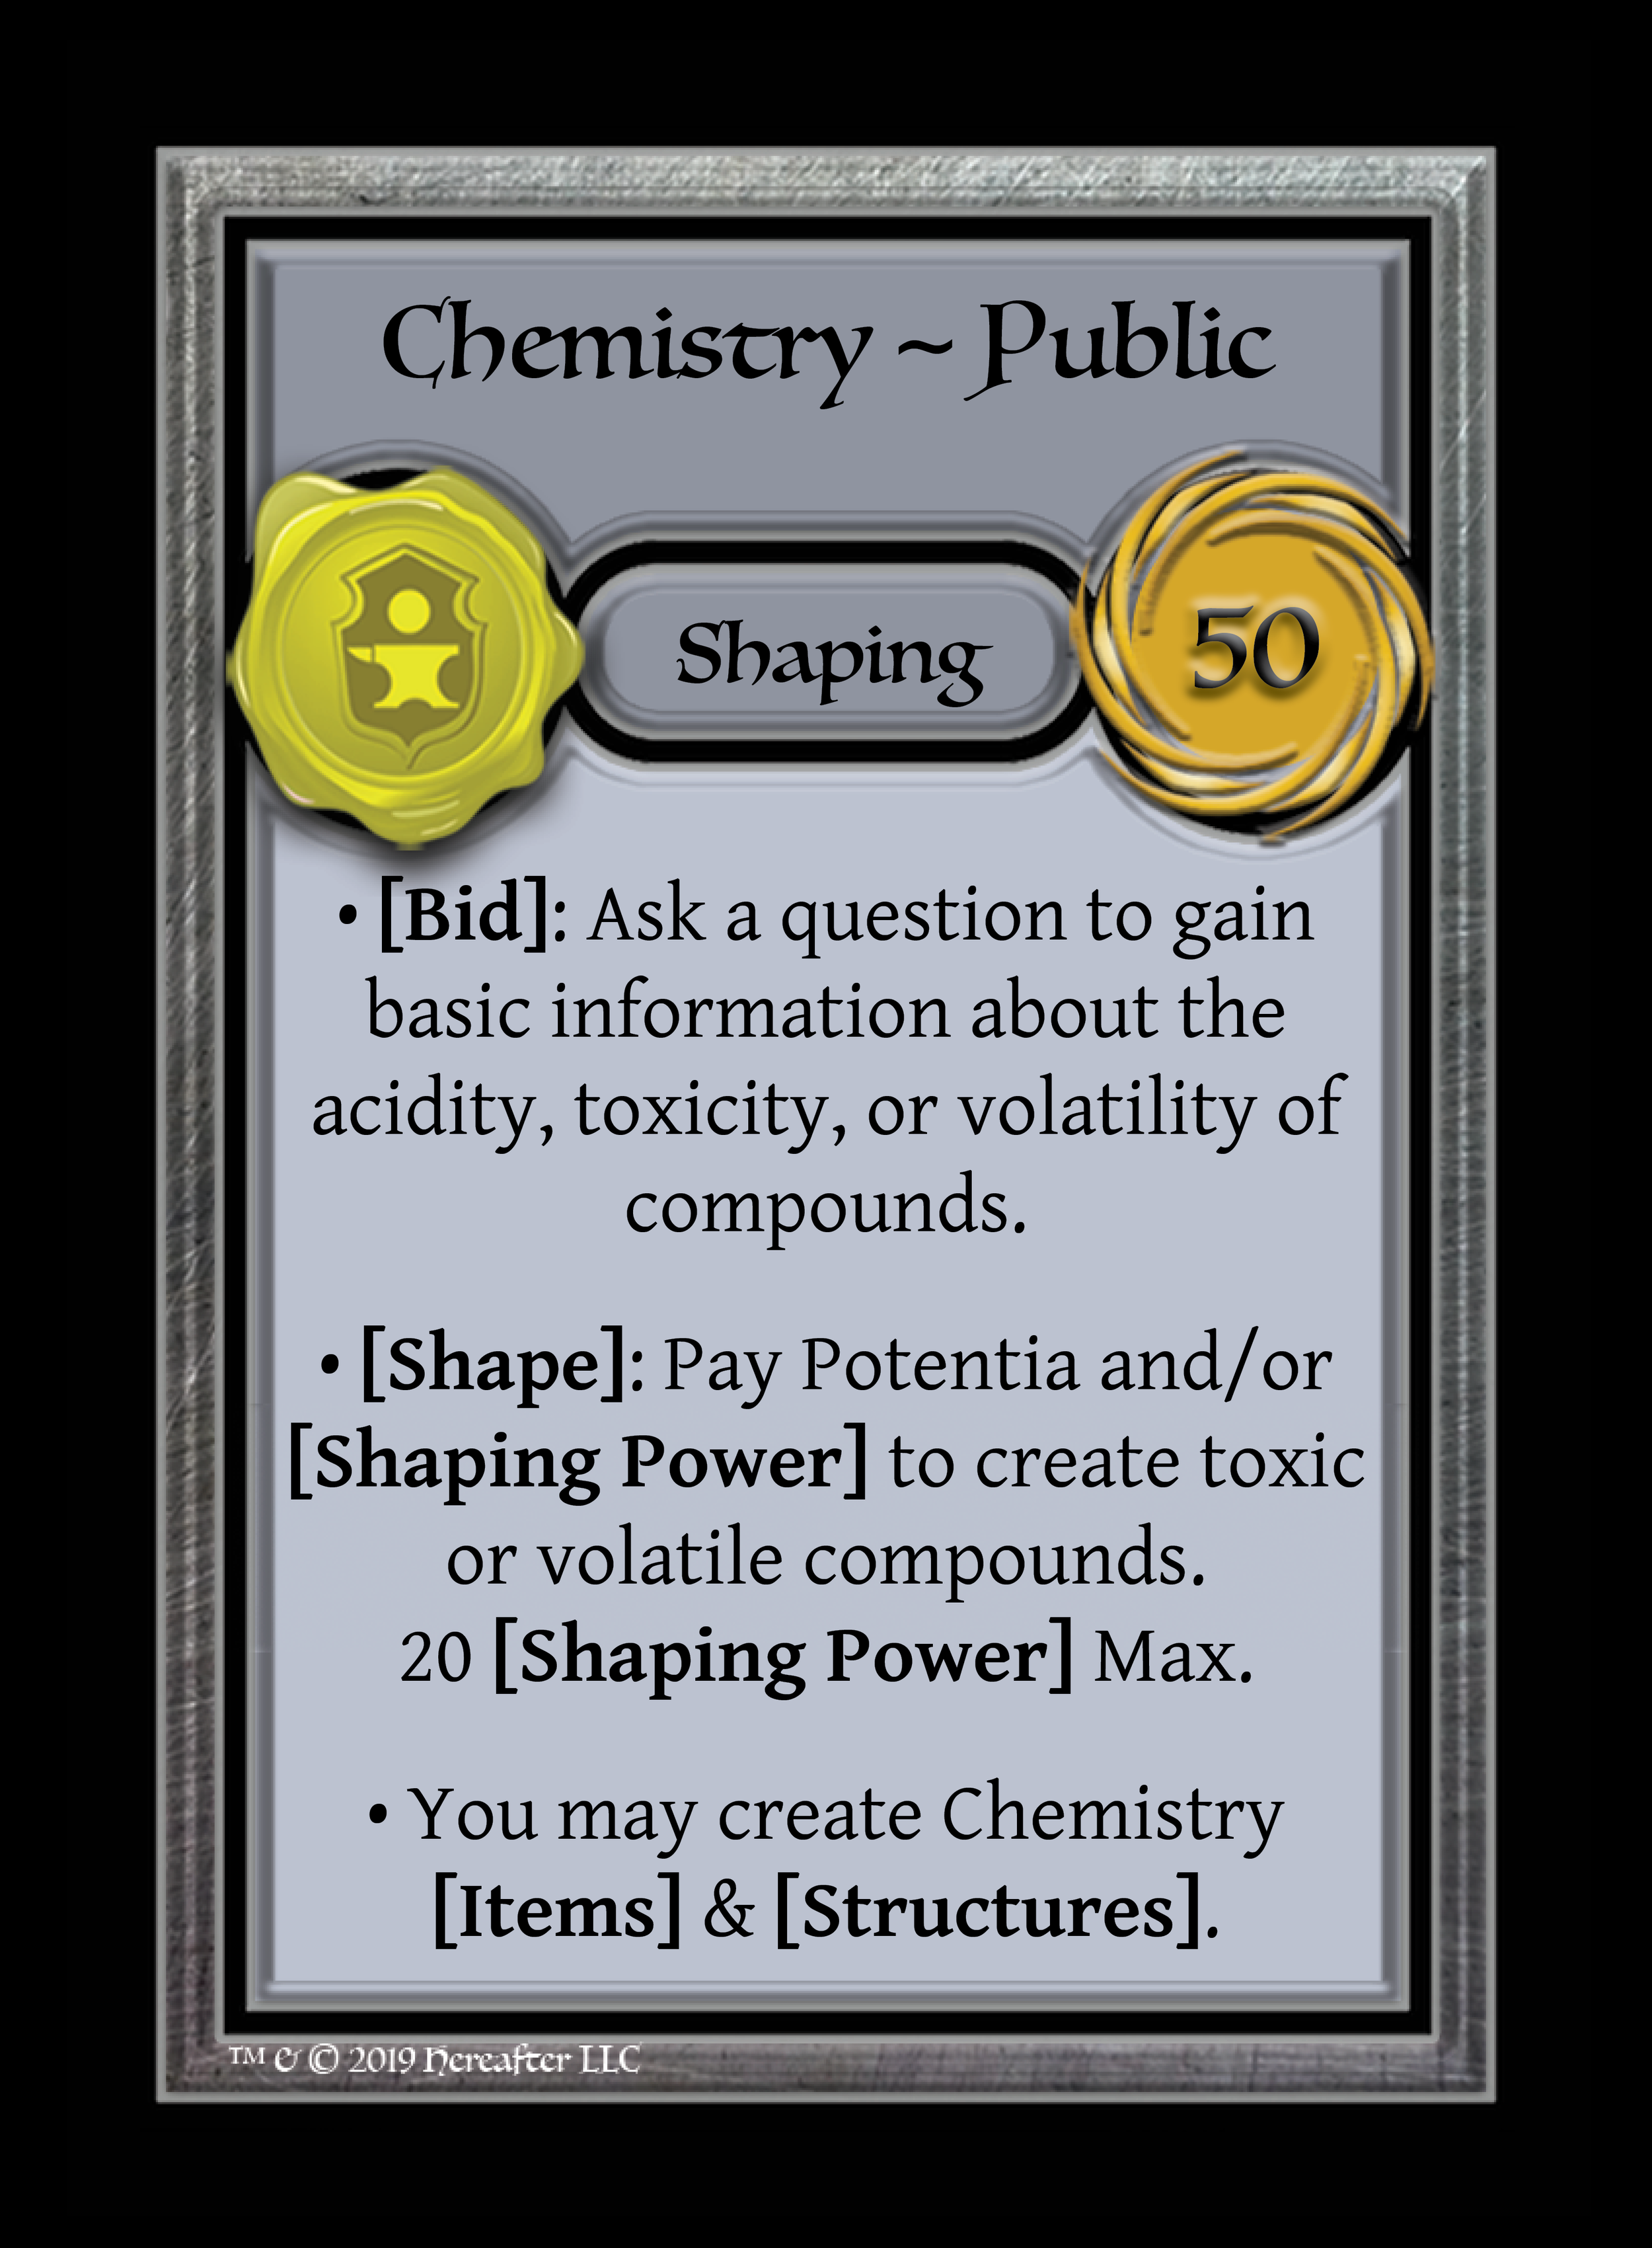 241_Shaping_Chemistry ~ Public_().png